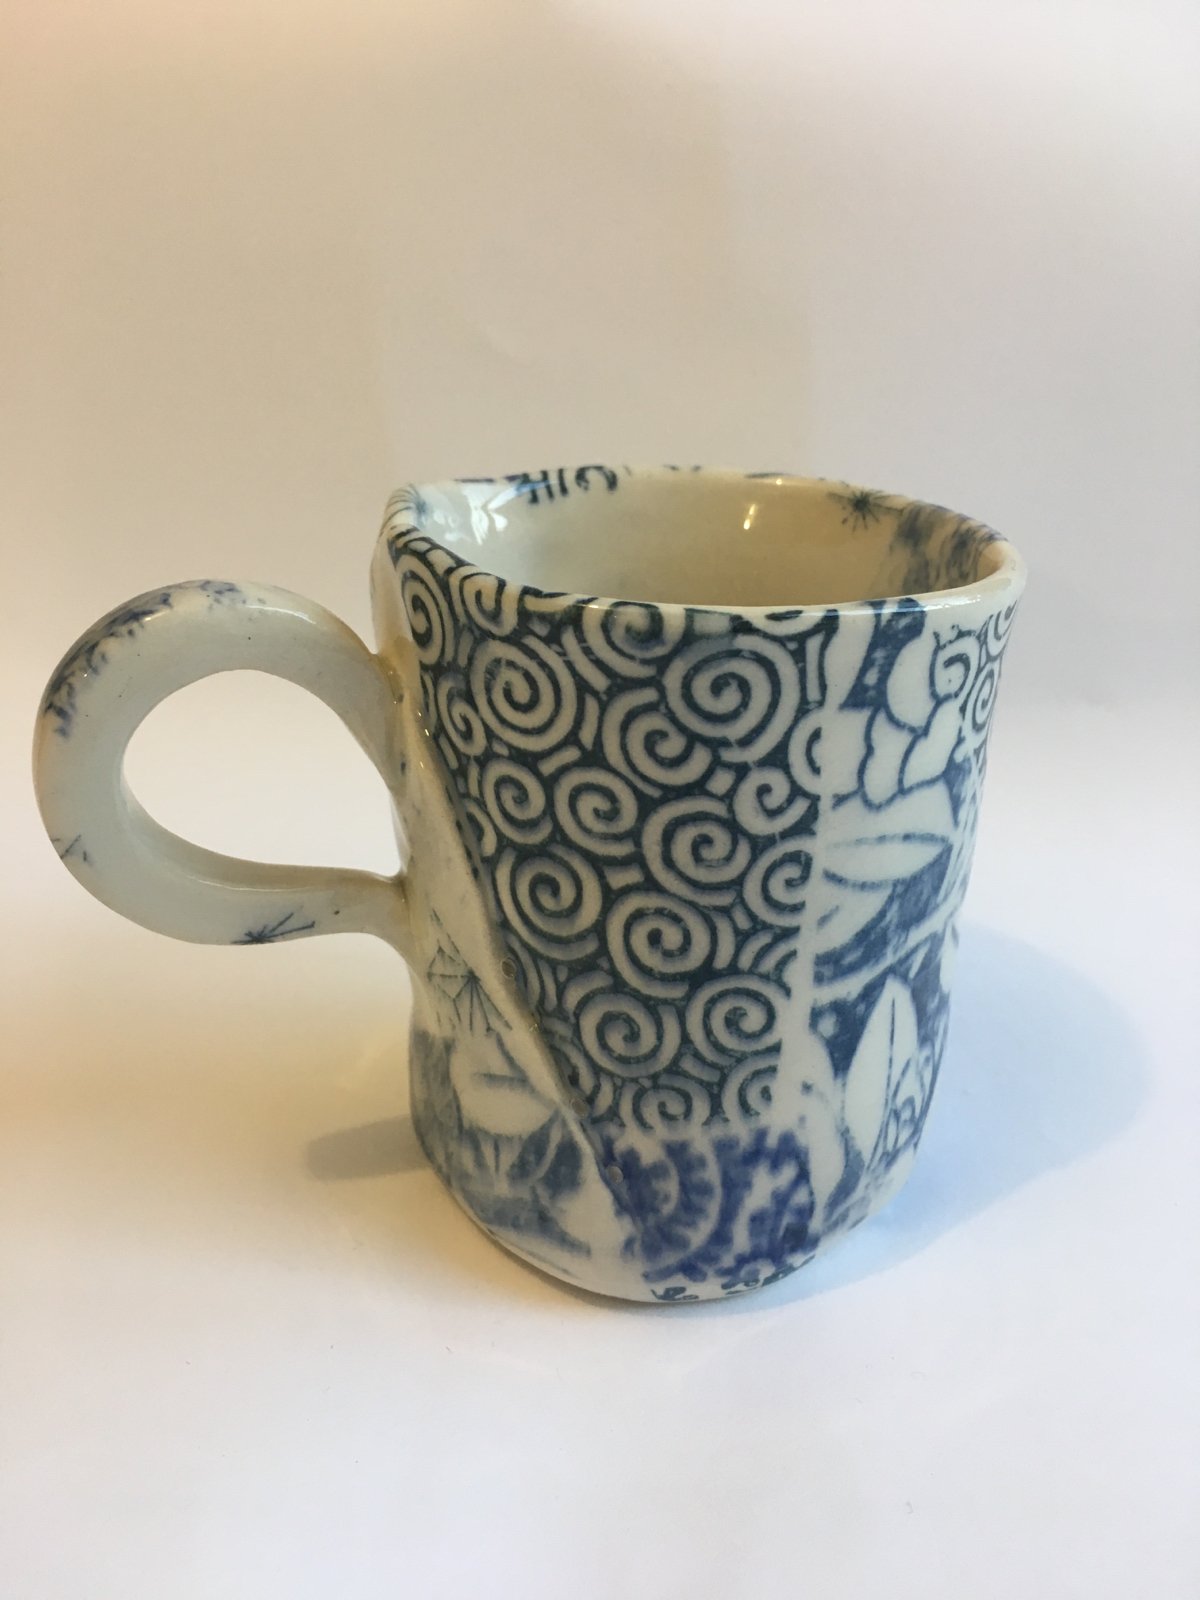 Image of My morning coffee cup